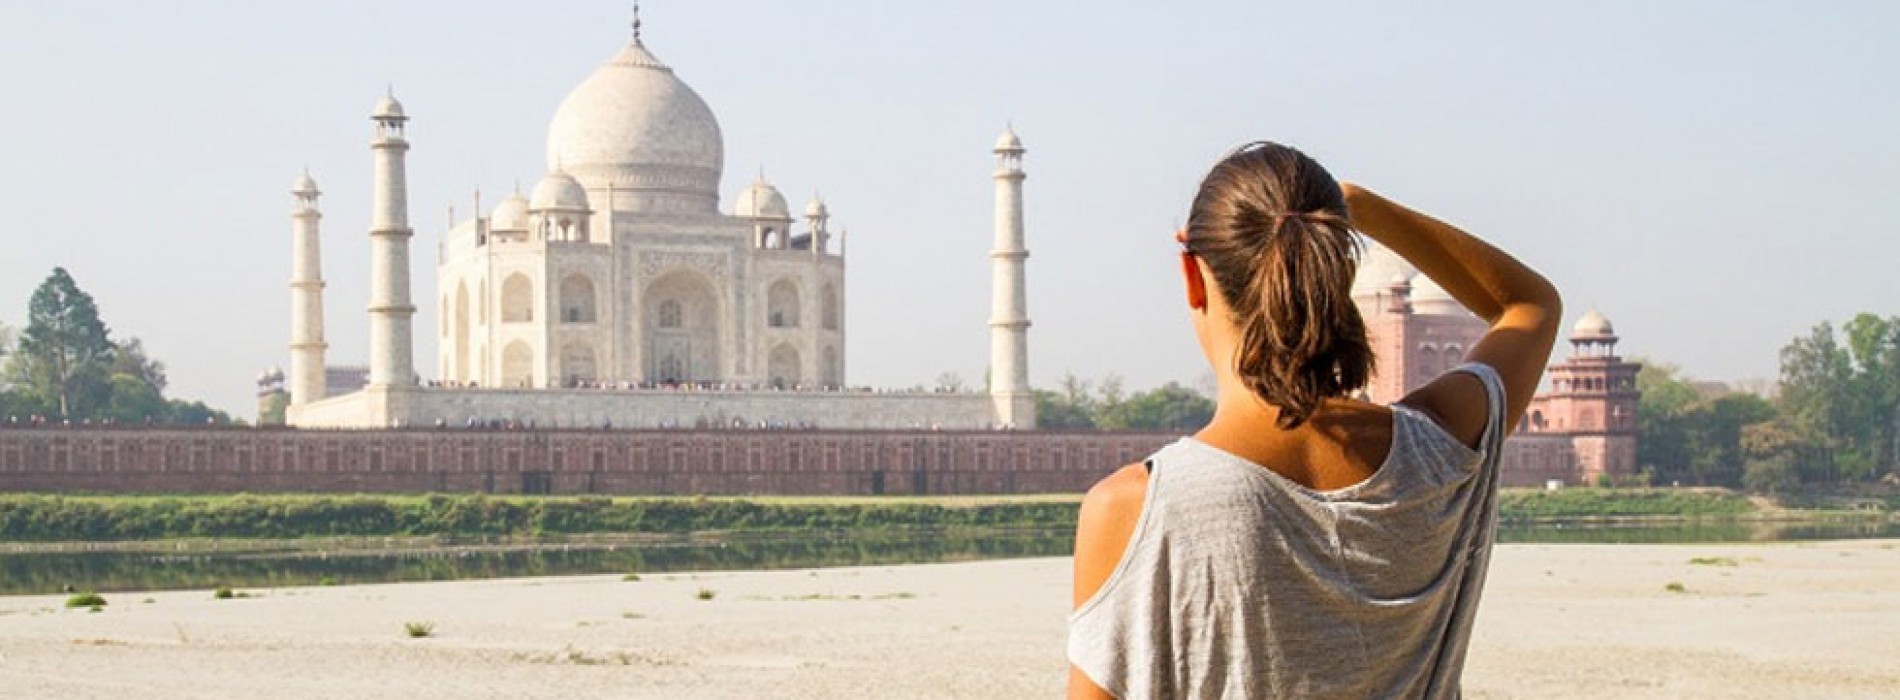 Double-digit growth for Indian visitor arrivals